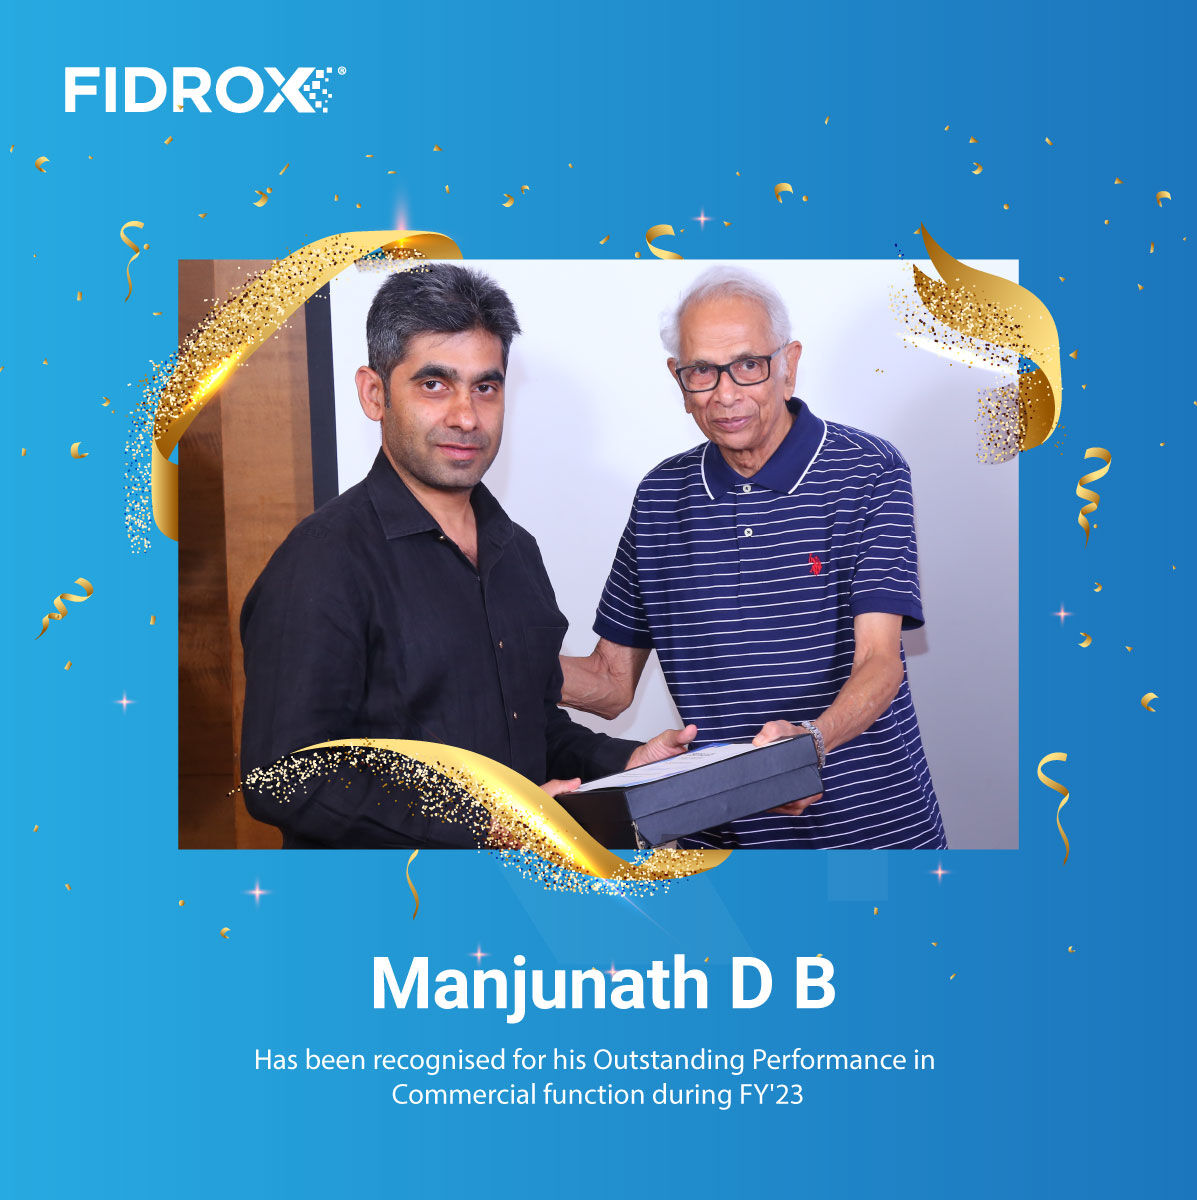 We are delighted to announce that Manjunath D B has been  recognised for his Outstanding Performance in Commercial function during FY'23. We are truly thankful for his invaluable contributions. Many #congratulations to Manjunath.
#Rewardsandrecognition #employeeengagement #Fidrox